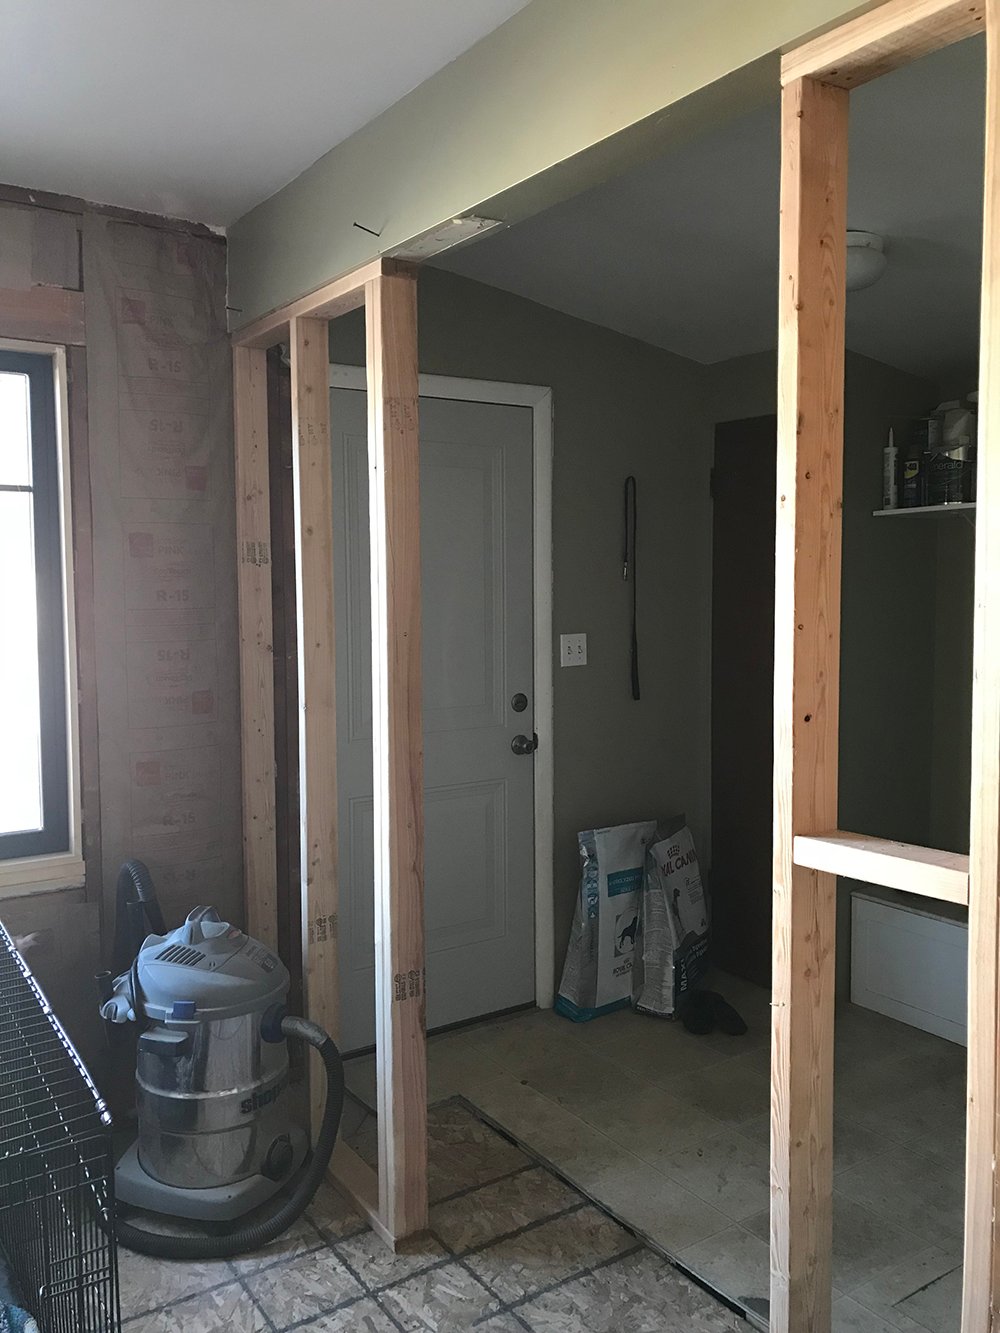 Framing Walls in The Kitchen